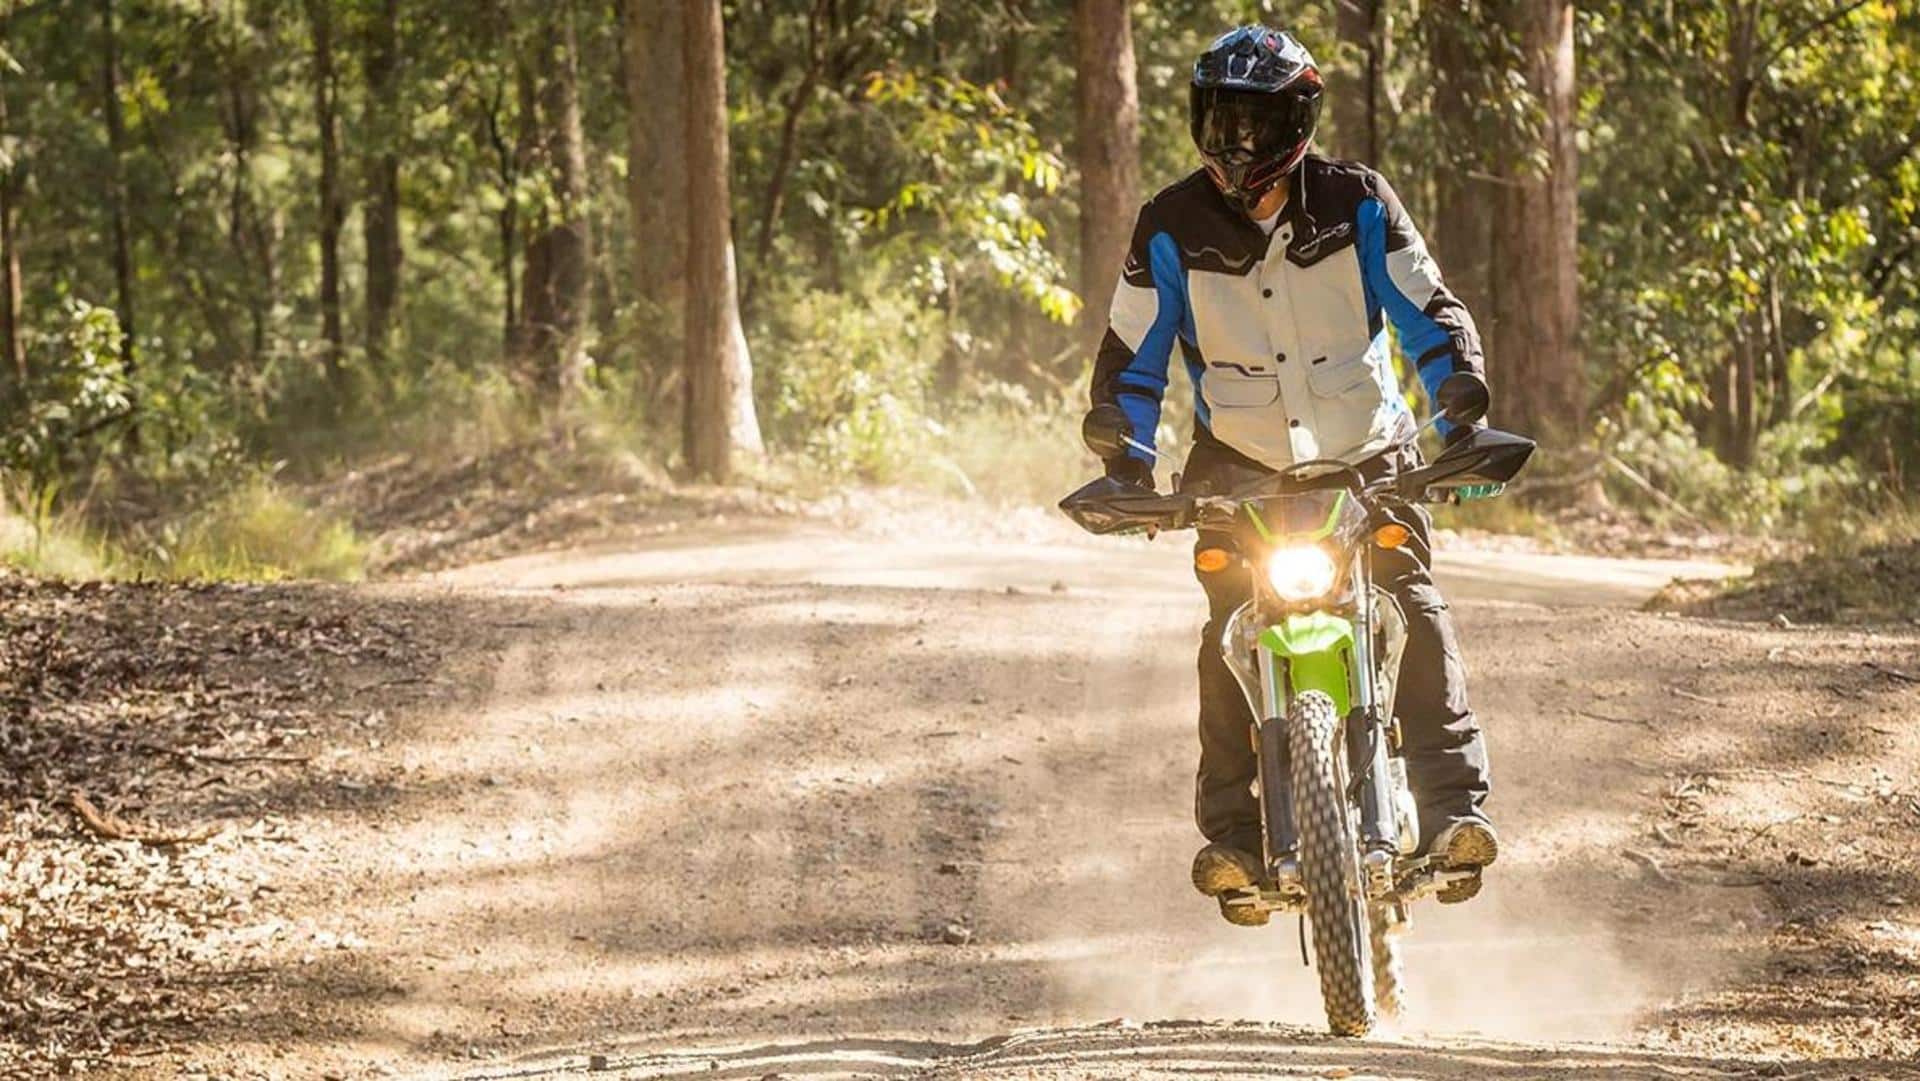 Kawasaki is planning to launch KLX 150BF bike in India